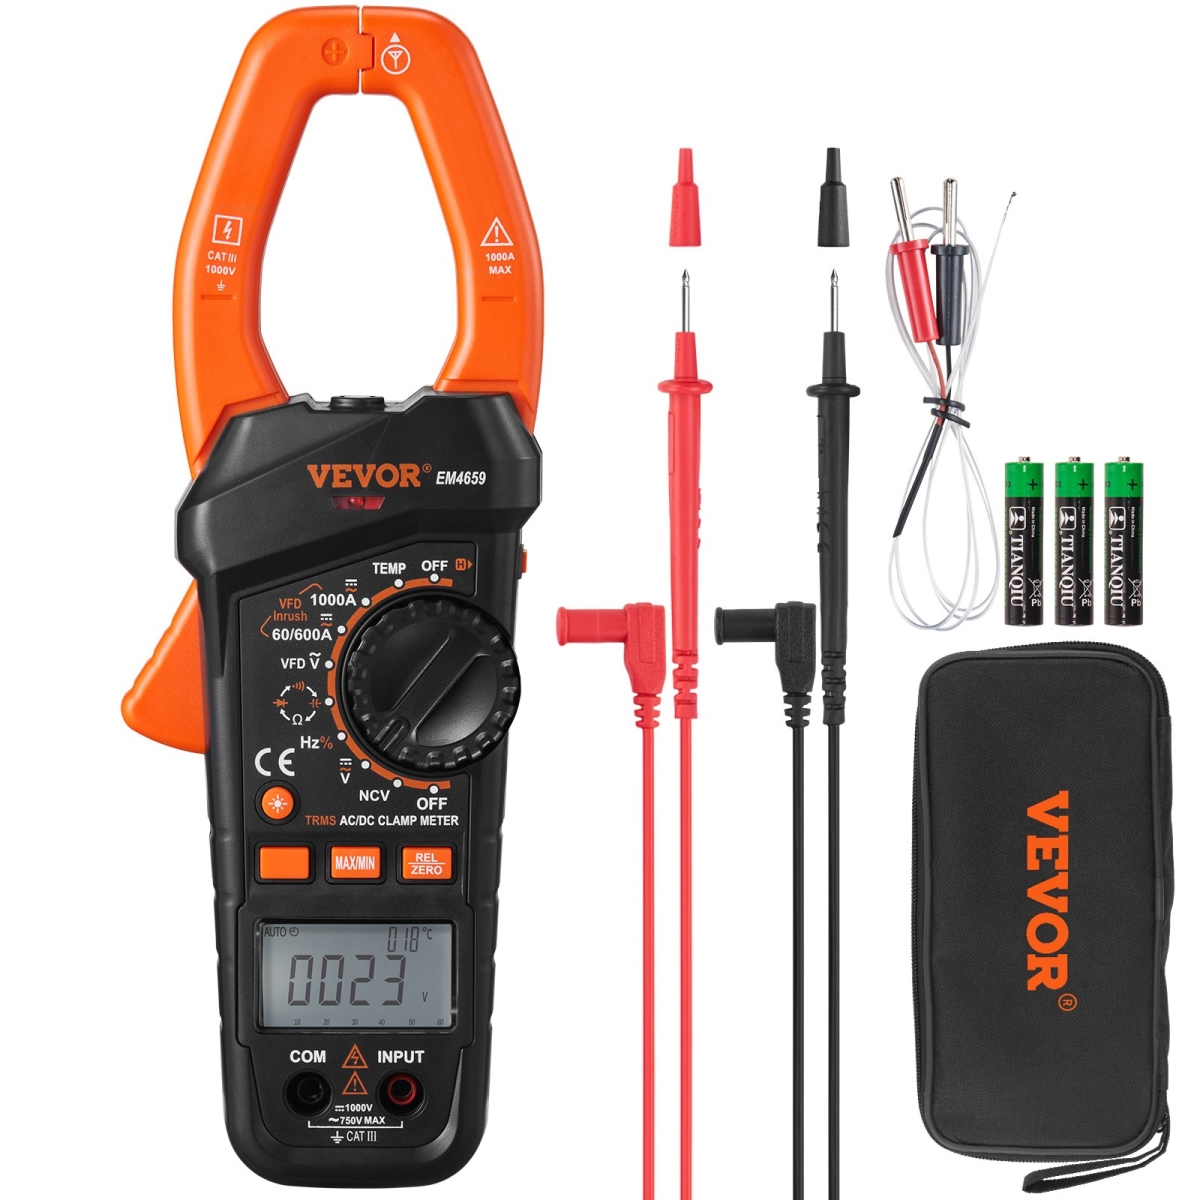 Picture of Vevor QXBFZDKCWACDCBUUBV0 1000A T-RMS Digital Clamp Meter